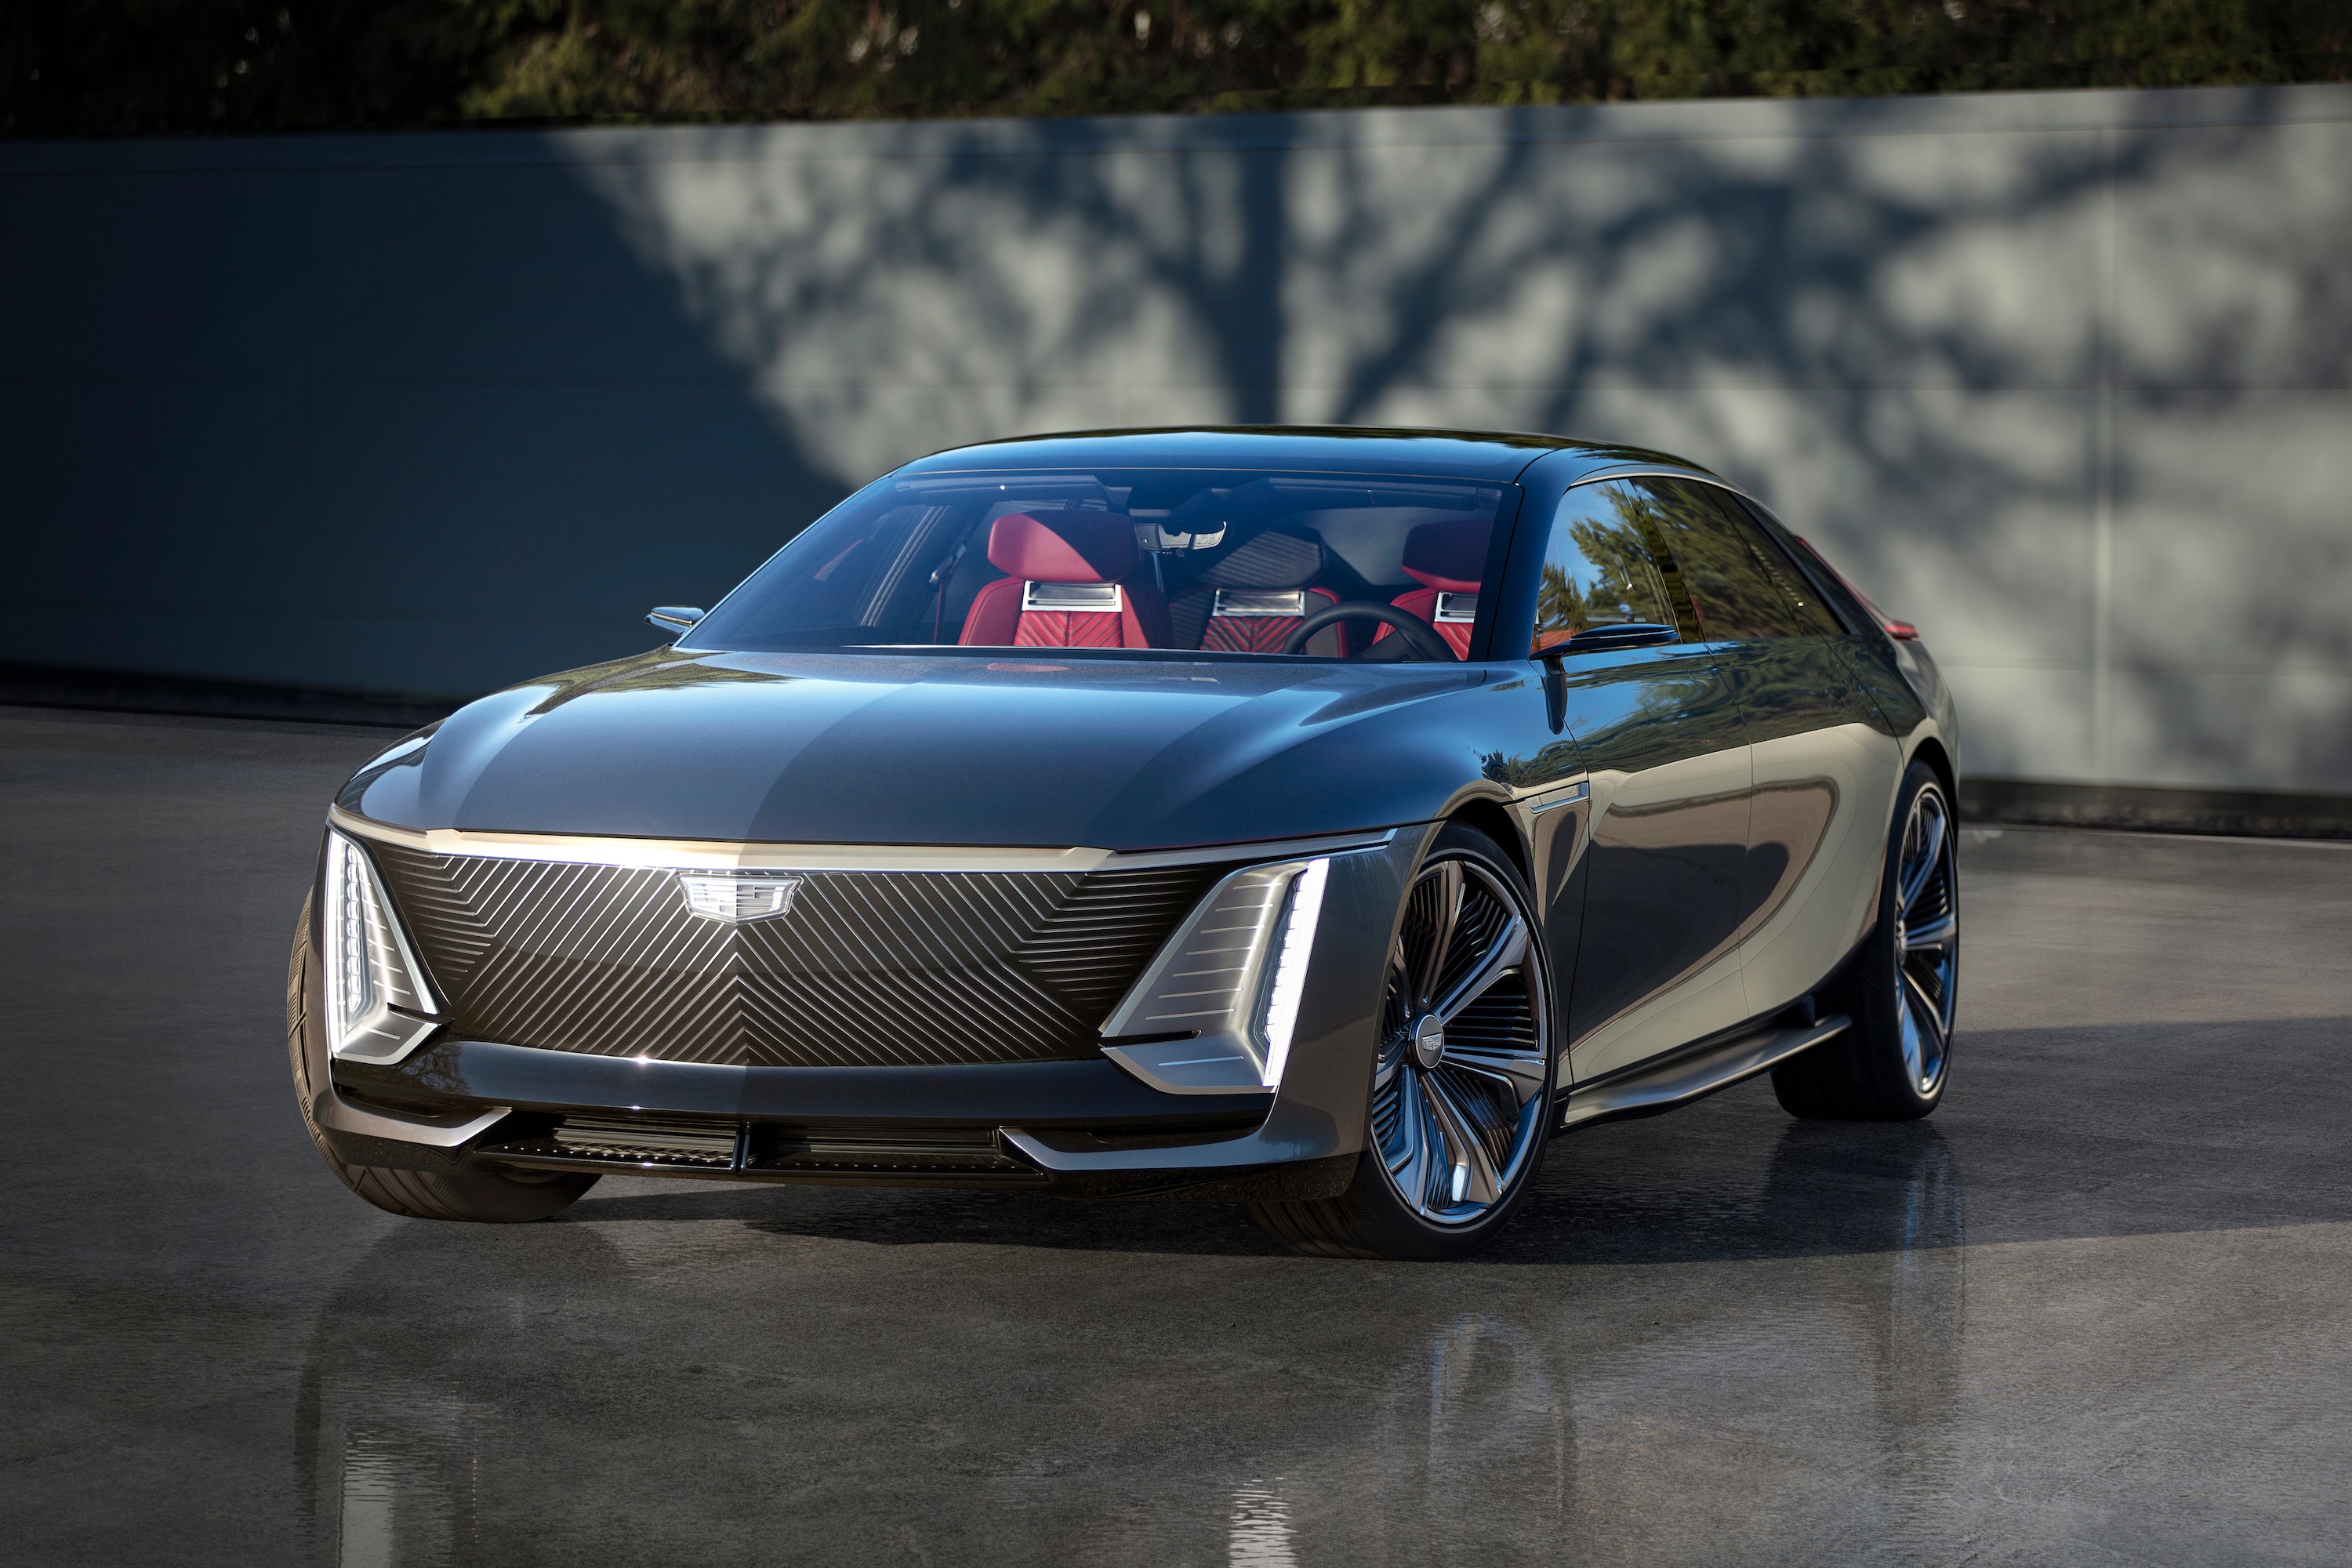 Cadillac Unveils Electric Vehicle to Compete with Bentley and Rolls-Royce |  Architectural Digest